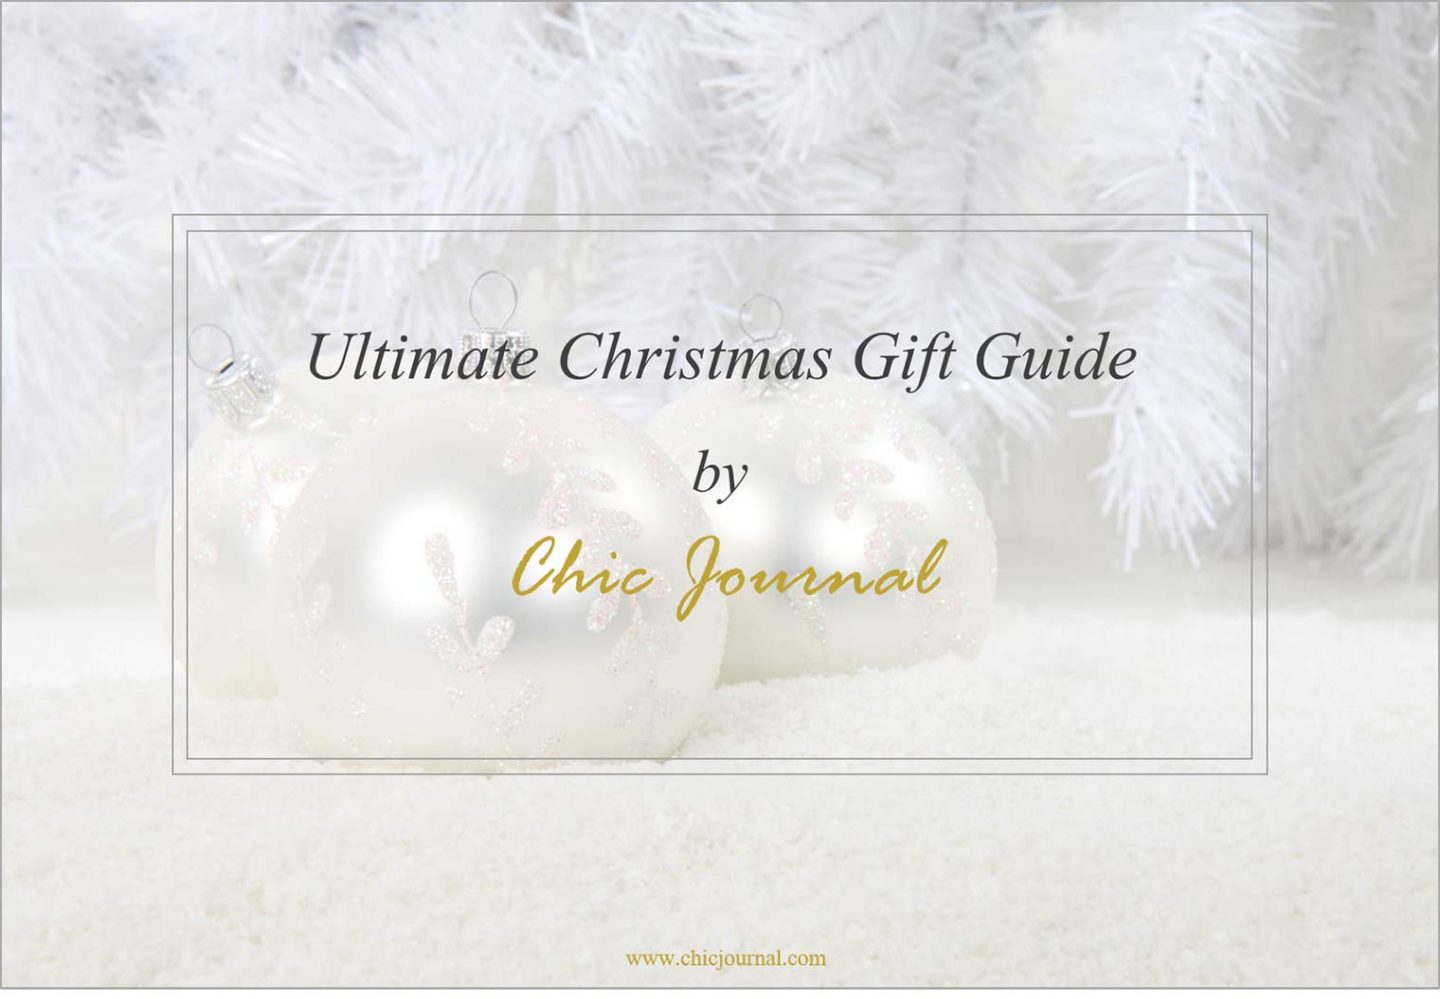 Ultimate Christmas Gift Guide by Chic Journal